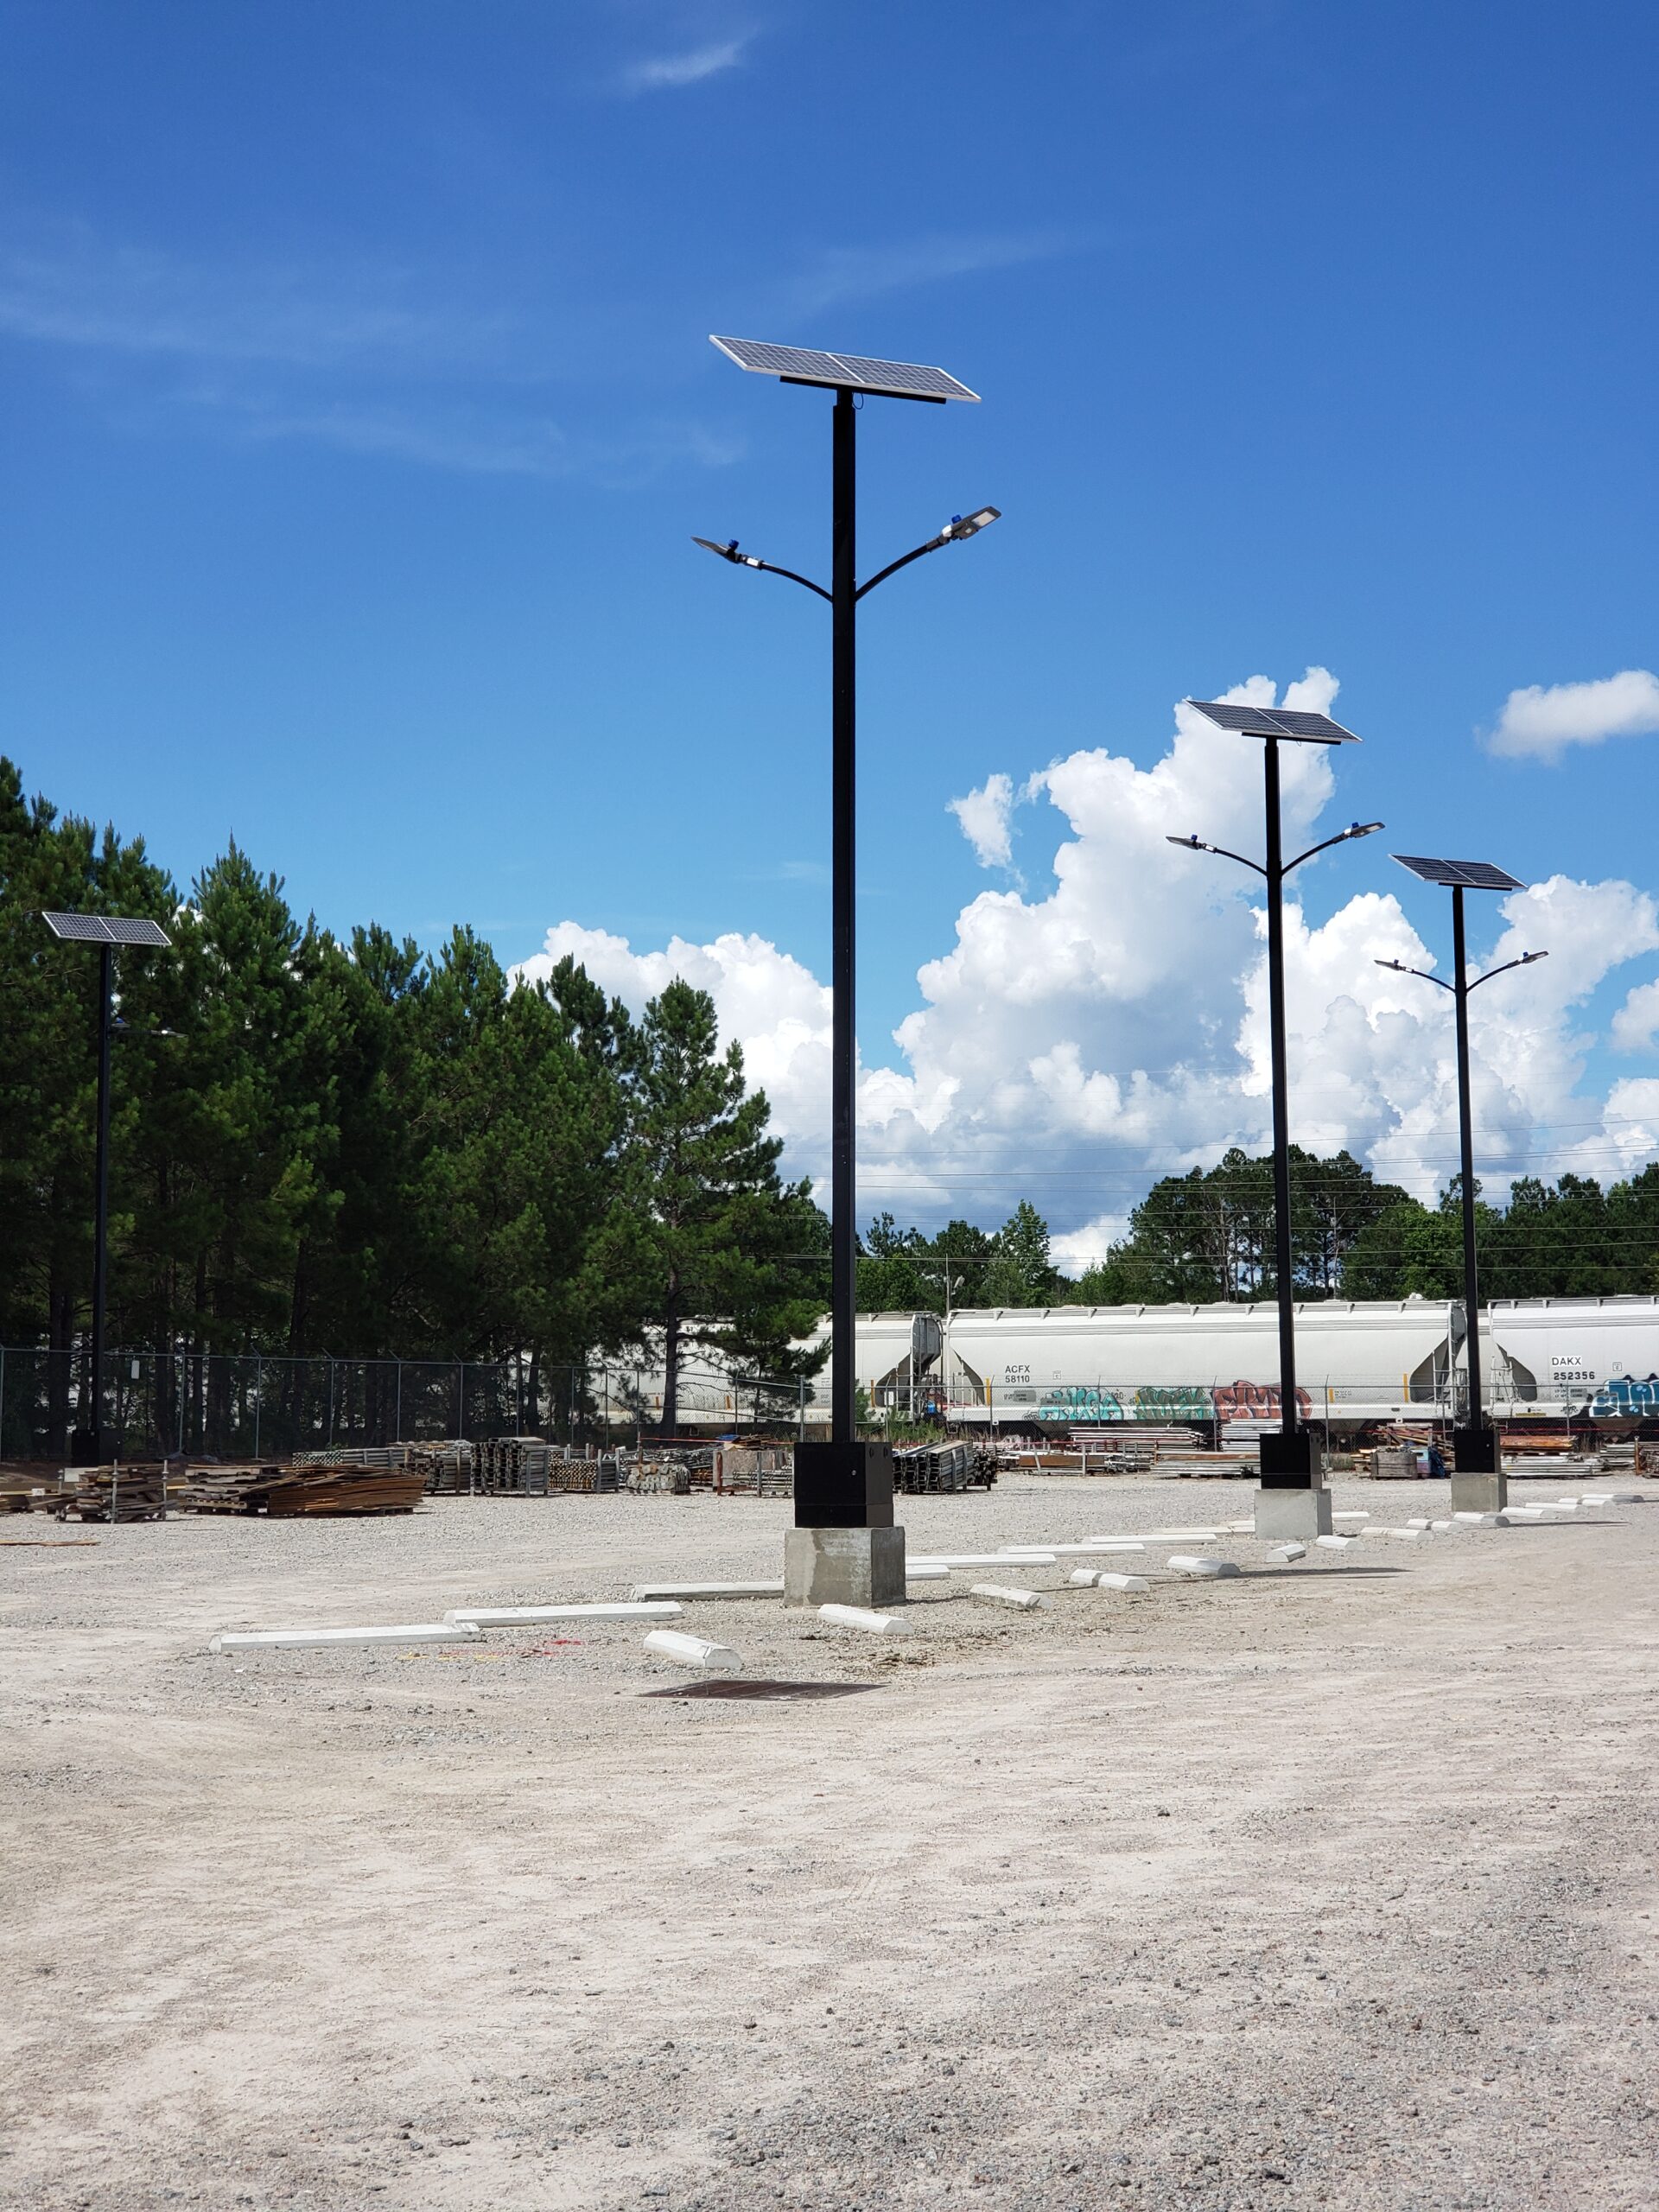 Solar Powered parking lot lights in an industrial outdoor setting